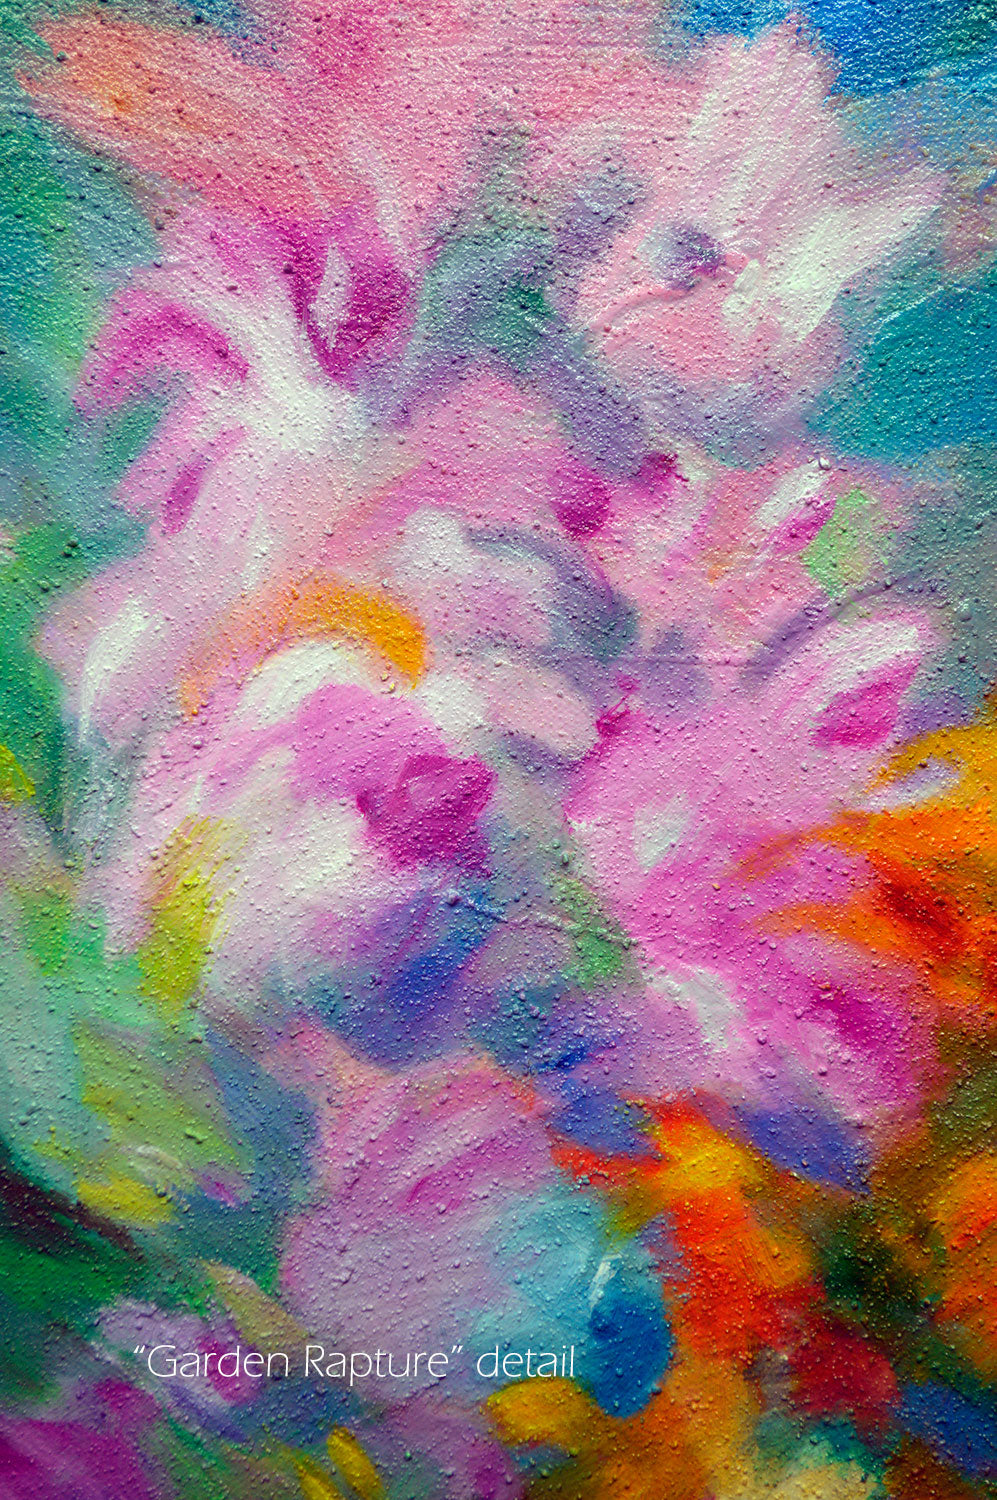 Abstract mixed media textured impasto painting "Garden Rapture" 24x36 inches, 1.5 inches deep with a very textured surface.  Original abstract art for sale.  I was really enjoying the late summer blossoms this year, and the feeling made it's way into this painting.  Filled with beautiful, colorful summer floral blossoms. Detail view.